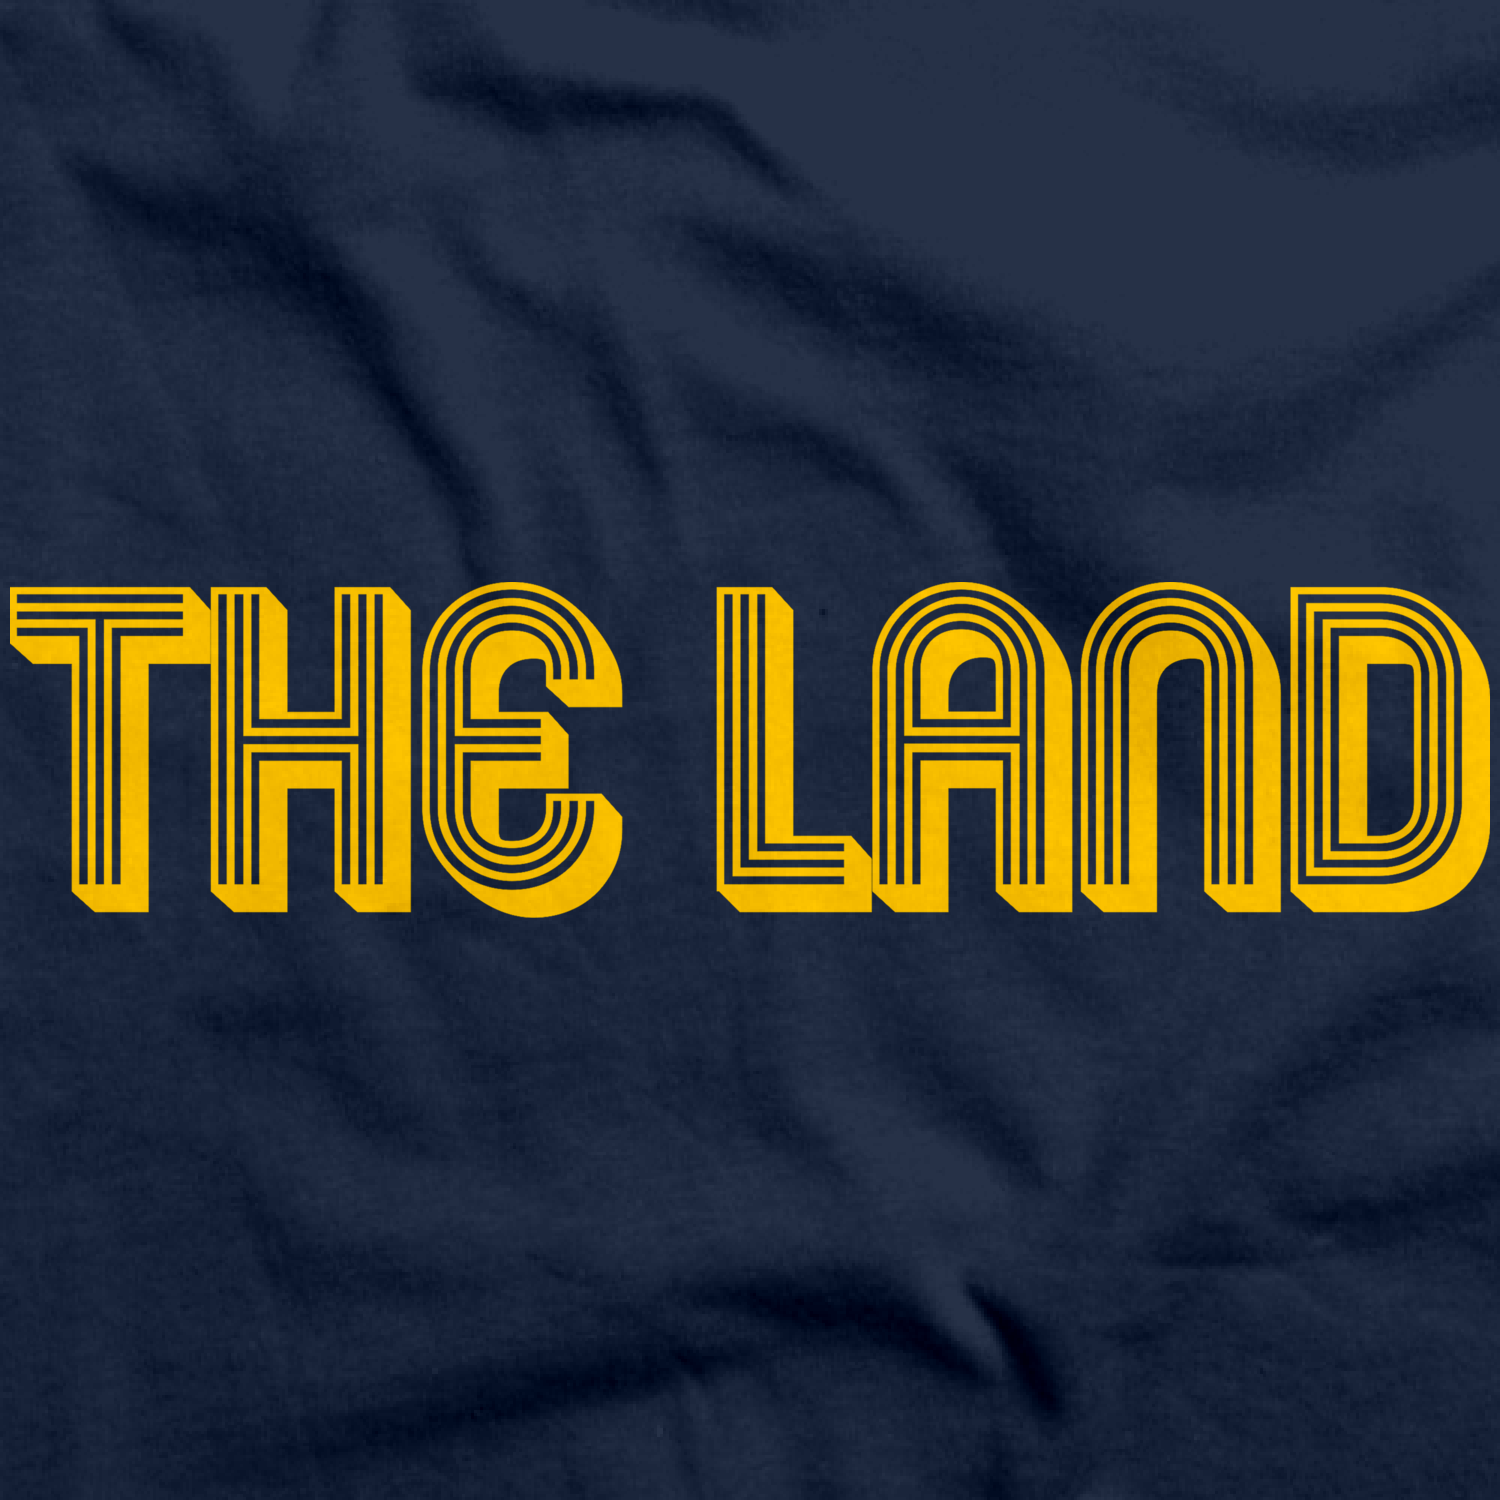 The Land